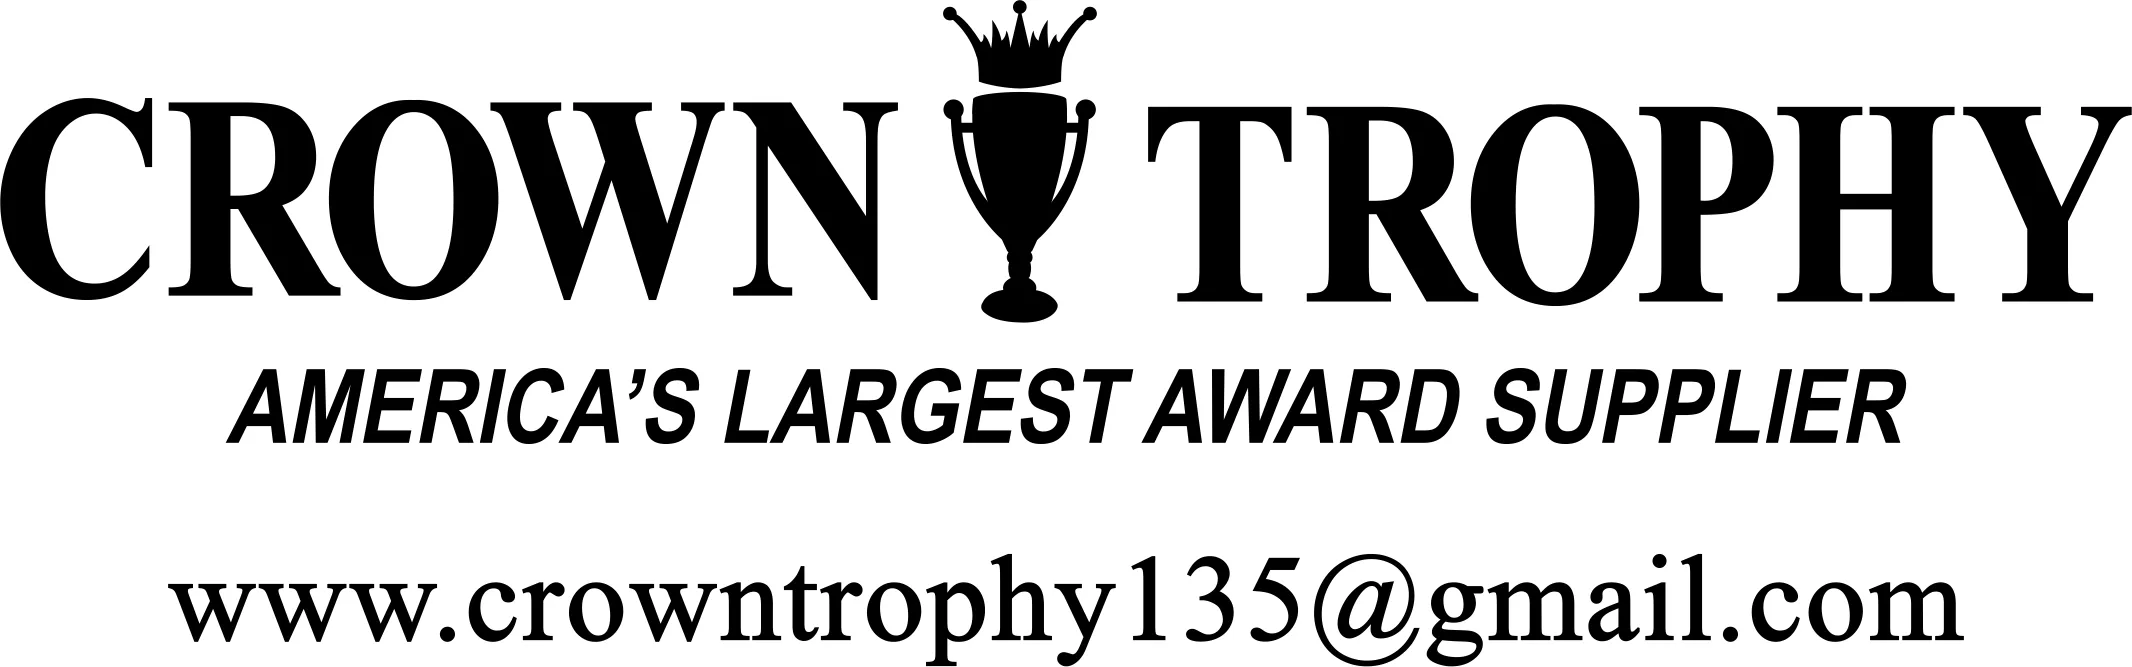 Crown Trophy logo in black with email details